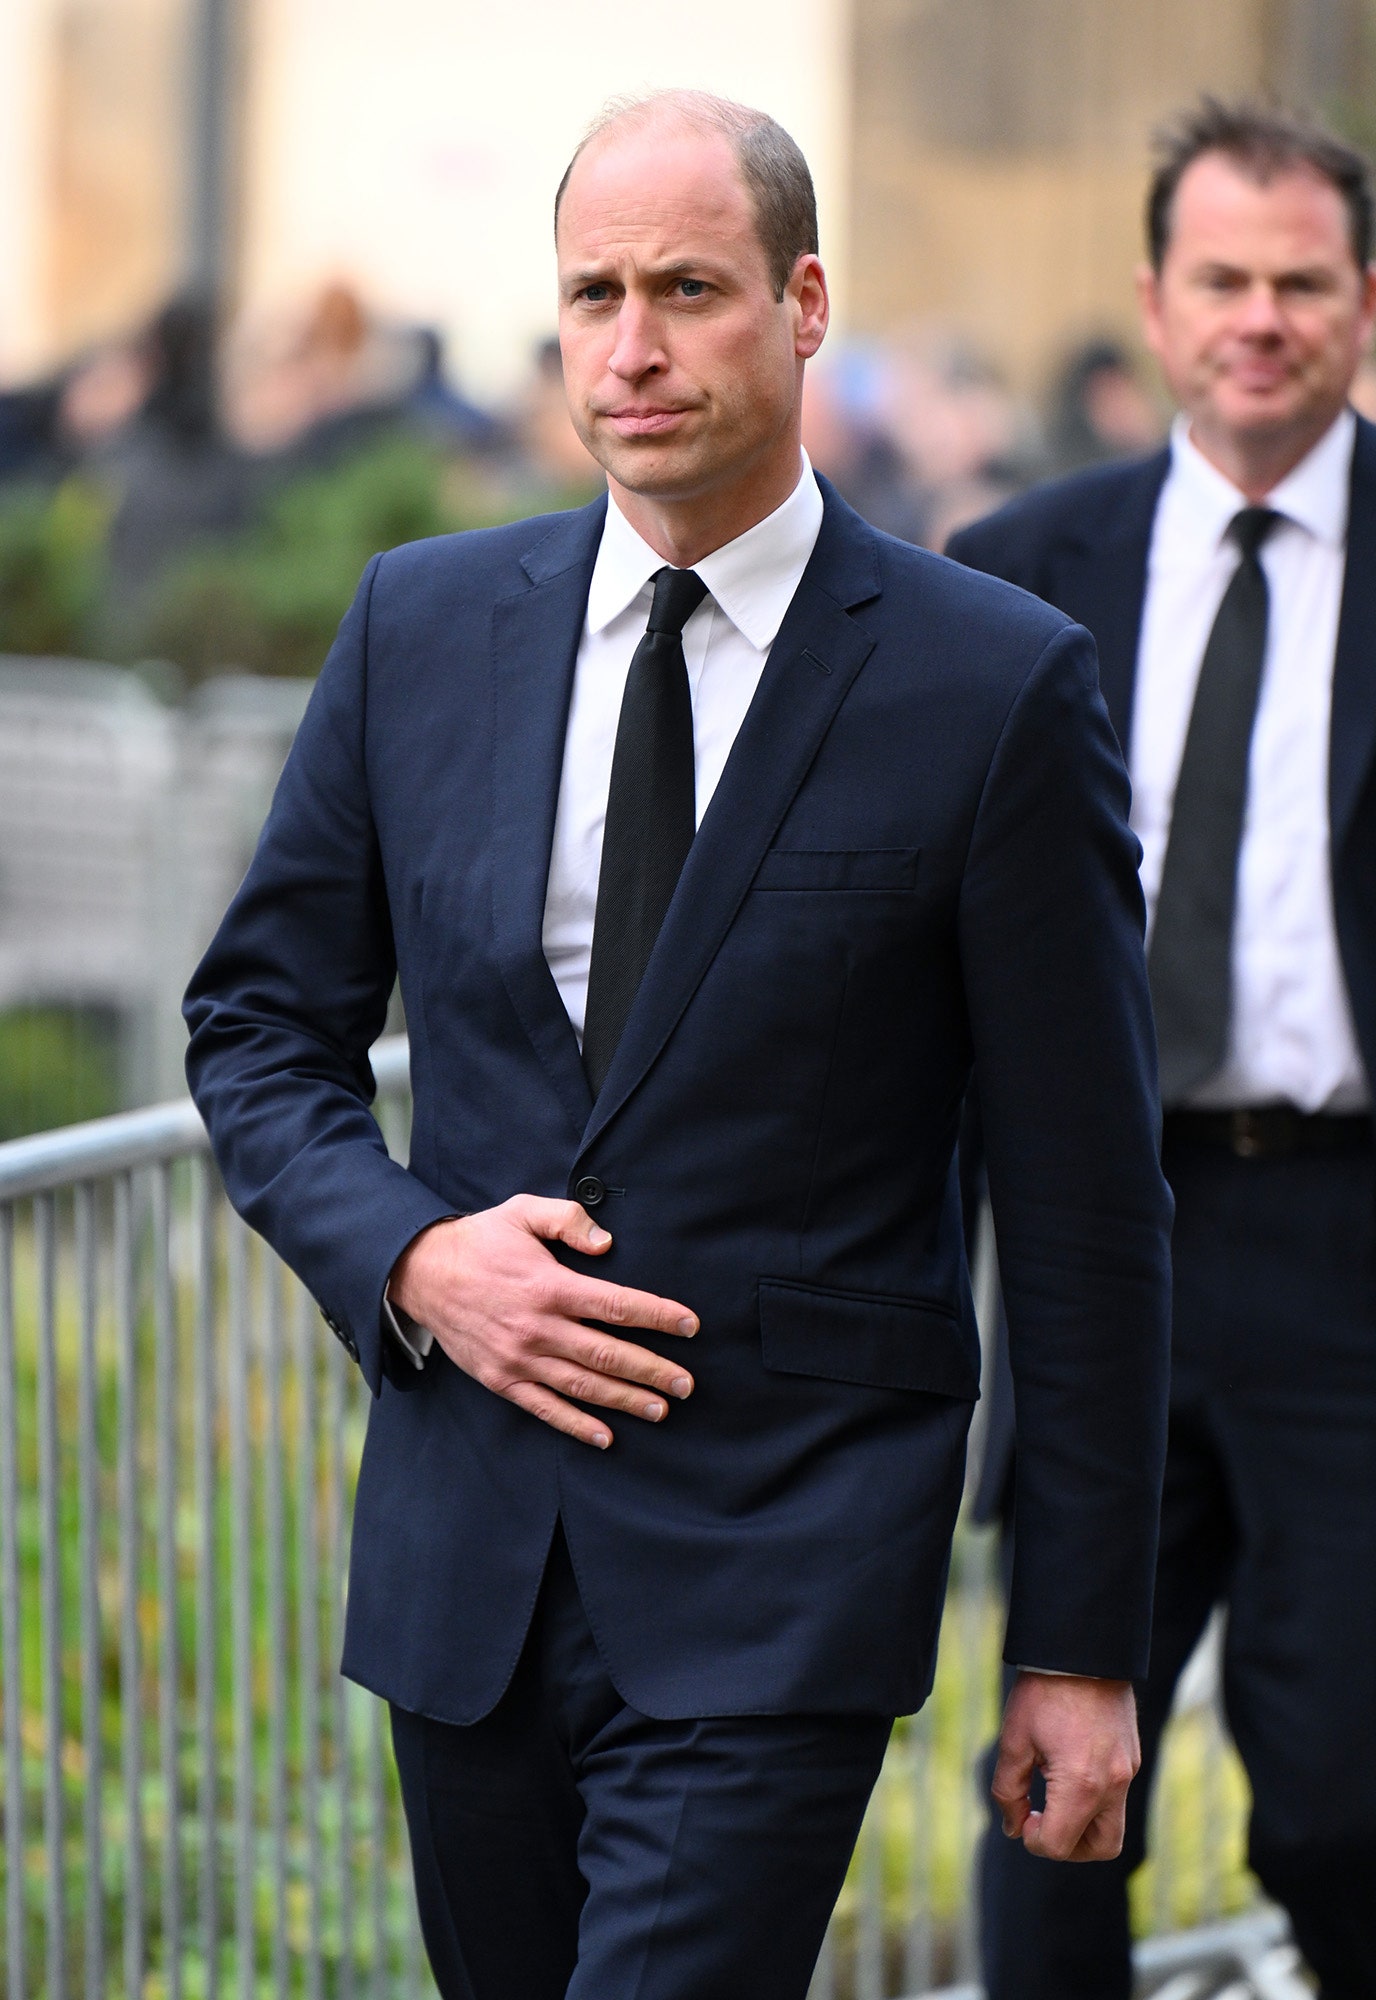 Prince William Pulls Out of Memorial Service Due to “Personal Matter”